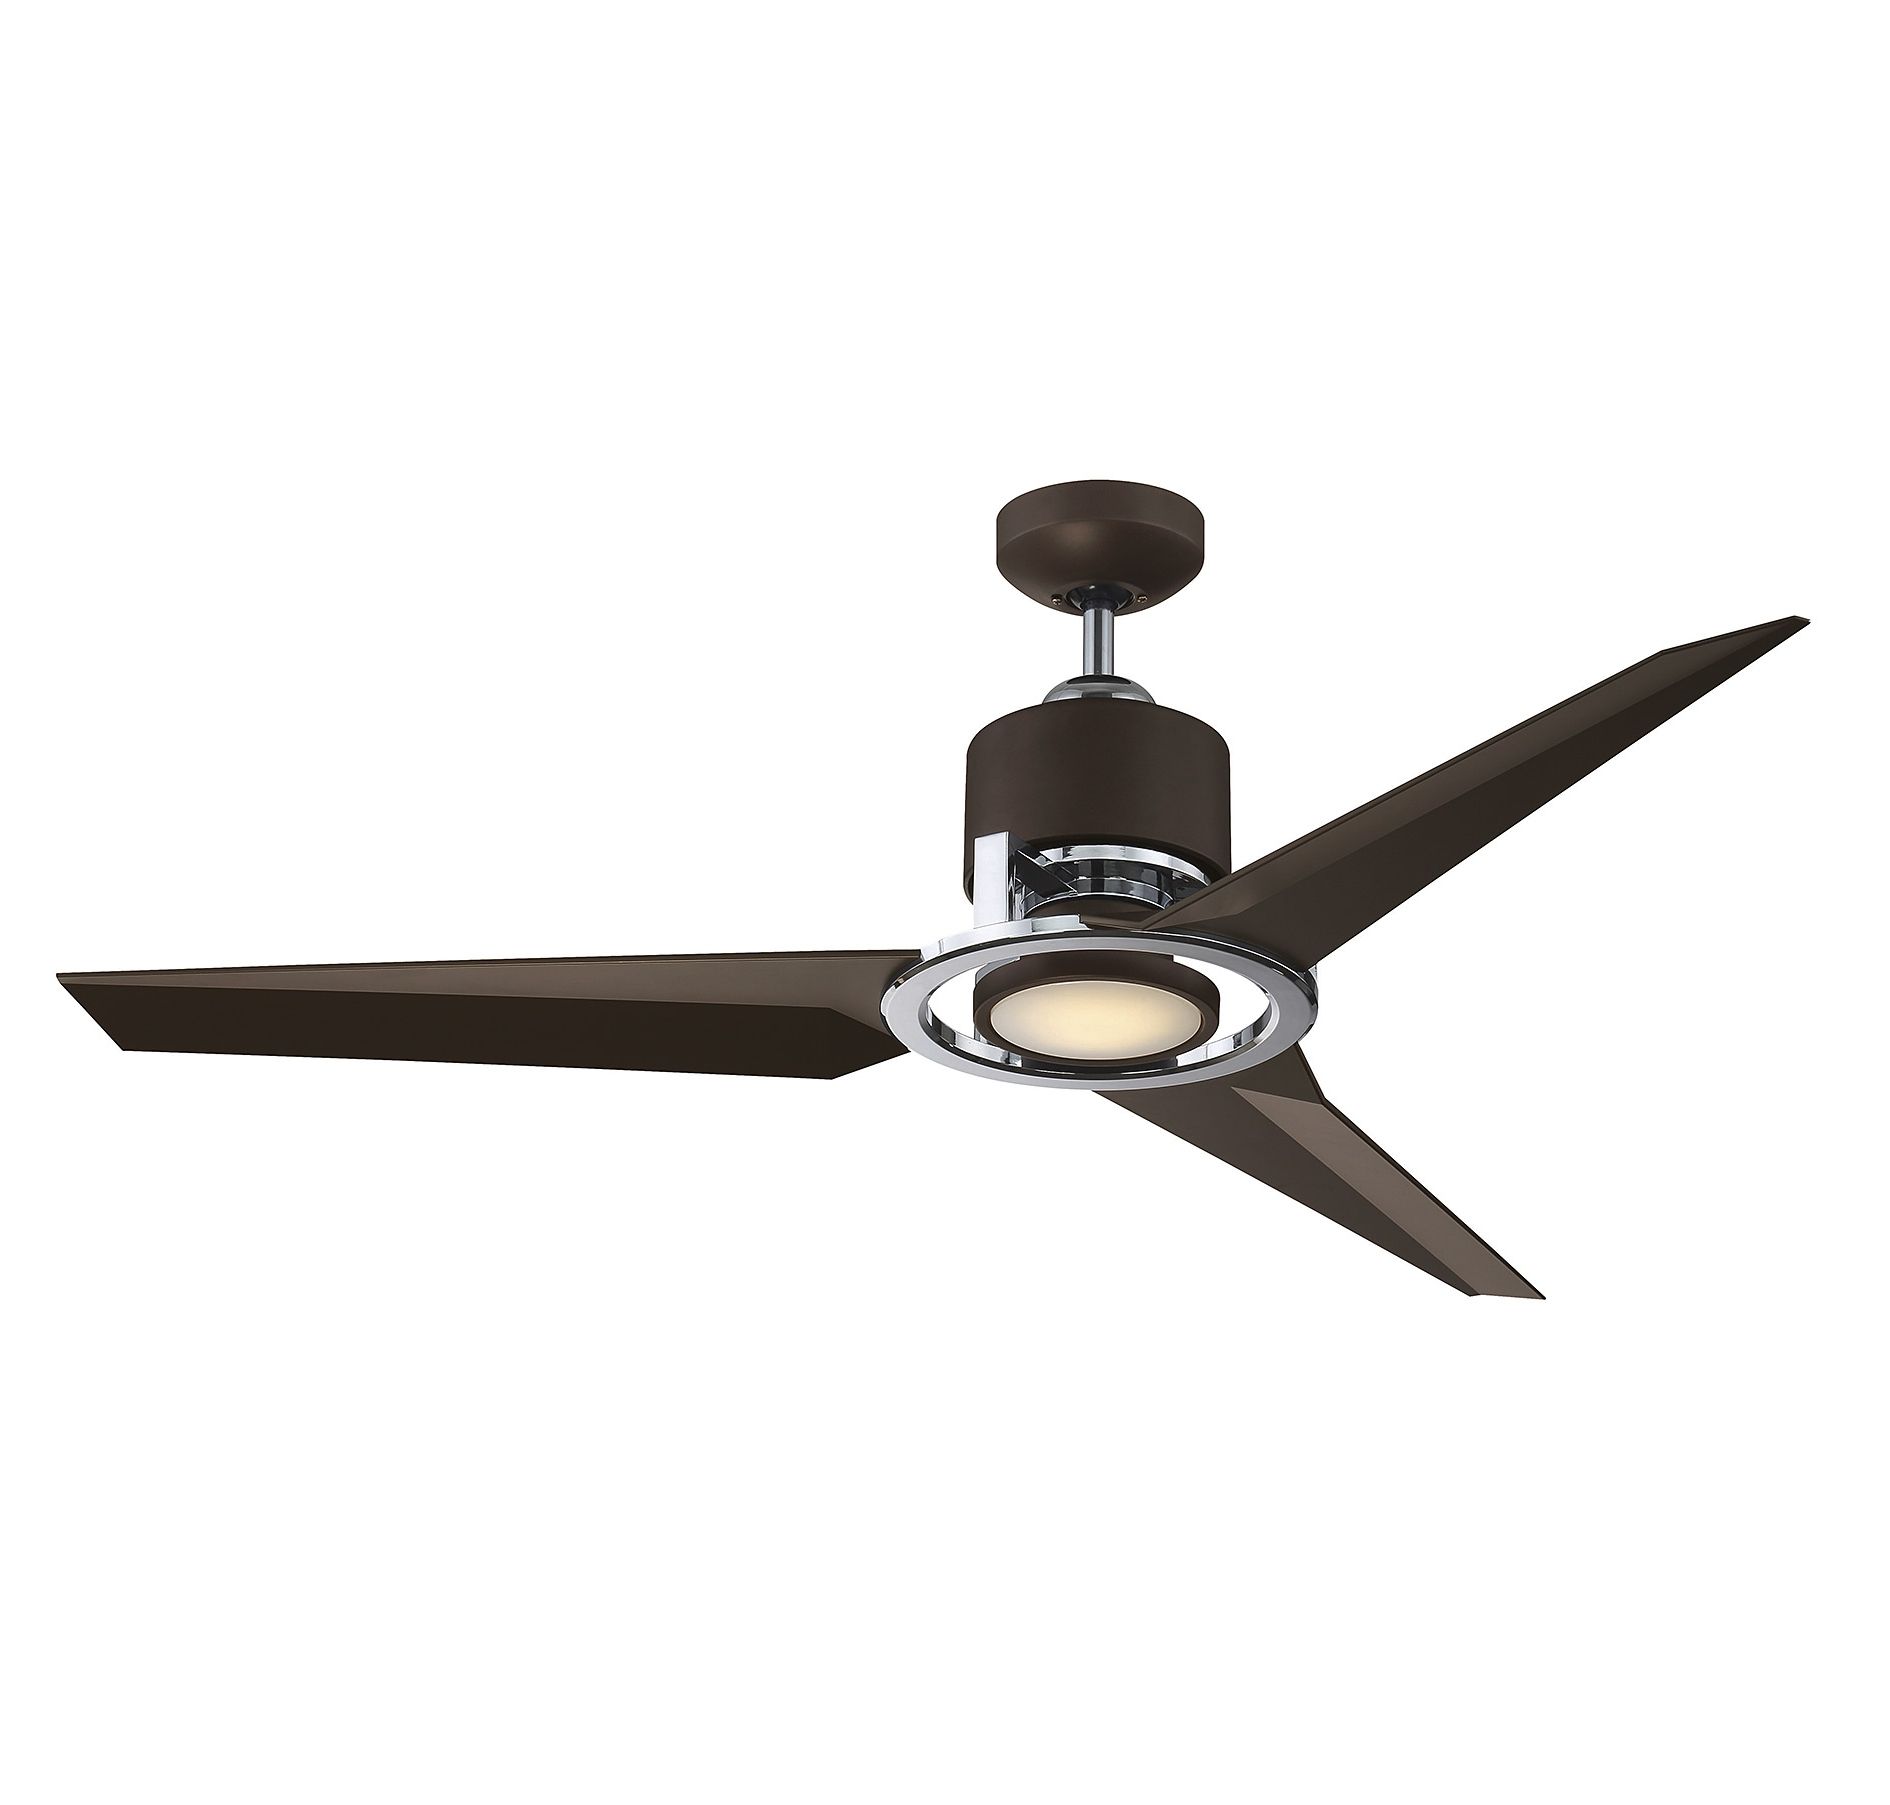 42 Inch Outdoor Ceiling Fans With Lights Within Most Recently Released 3 Blade Outdoor Ceiling Fan Lighting And Ceiling Fans, 3 Blade (View 5 of 20)